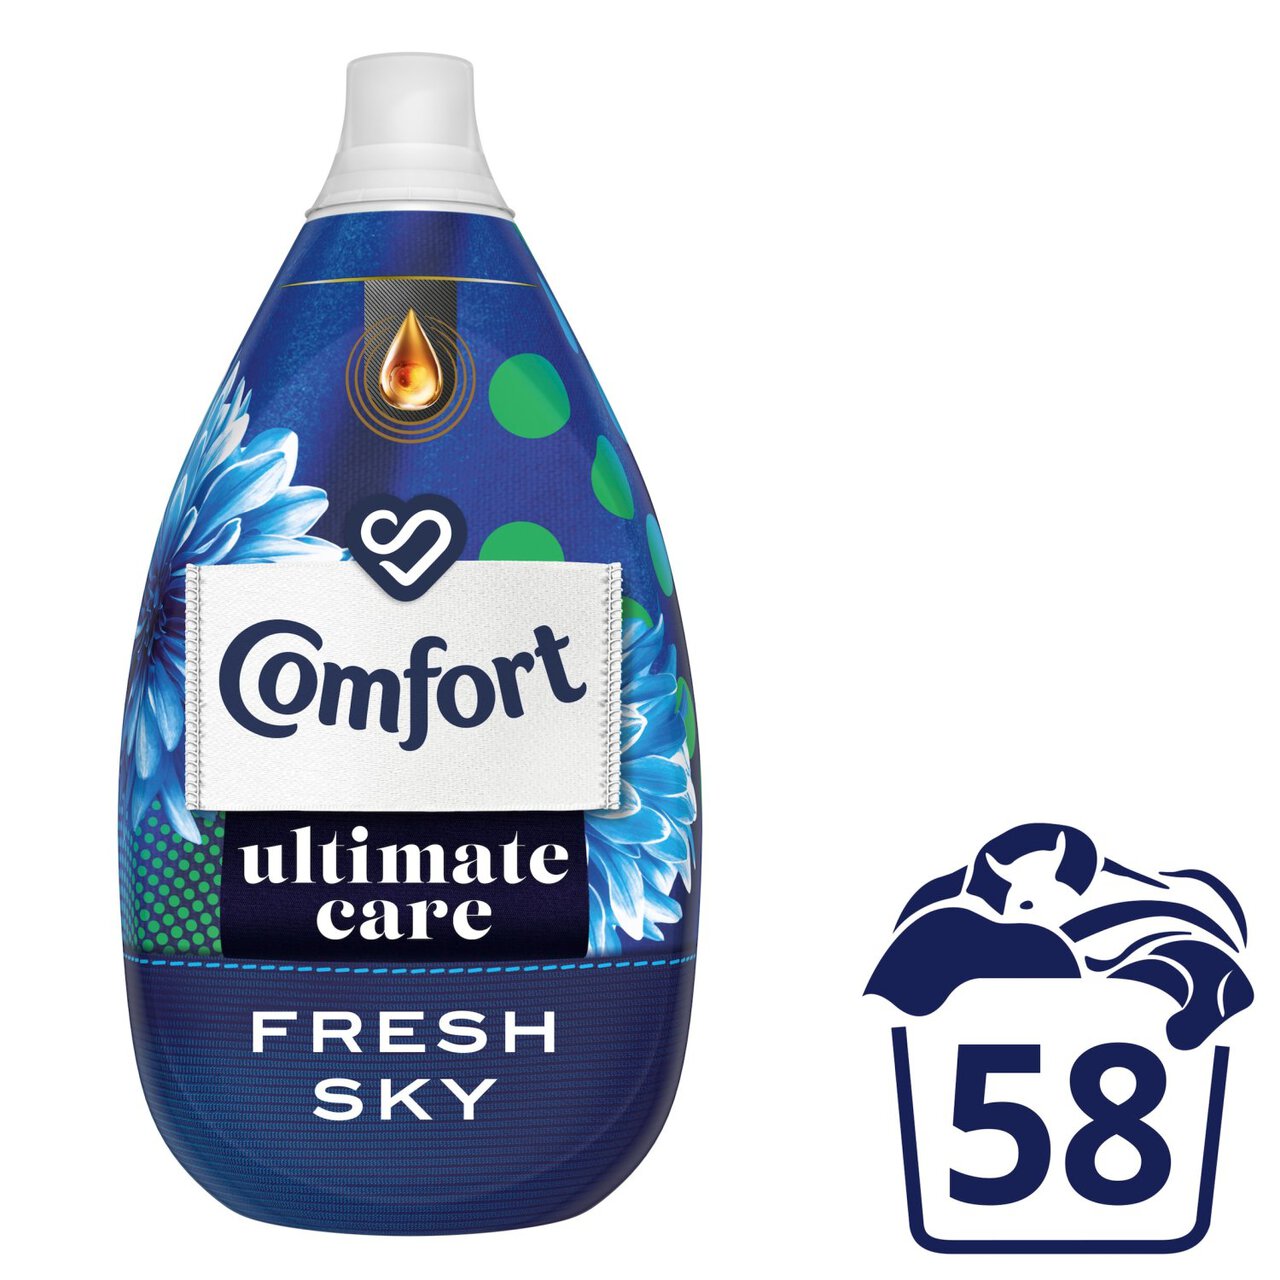 Comfort Intense Ultra Concentrated Fabric Conditioner Freshsky 58 Wash 870ml